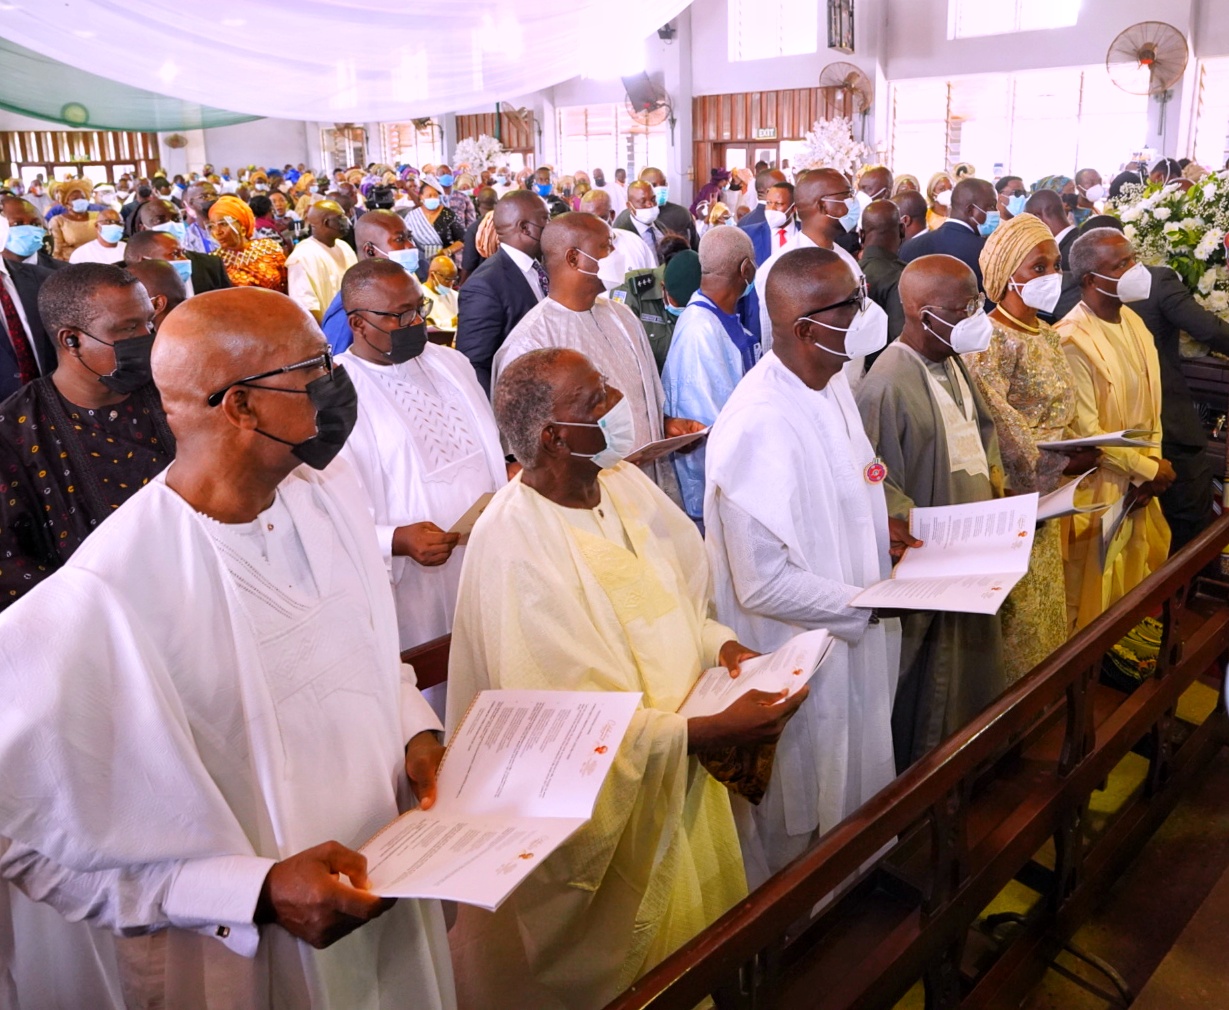 PICTURES: VICE PRESIDENT OSINBAJO, GOV. SANWO-OLU ATTEND FUNERAL SERVICE OF MRS OLUBUNMI OYEDIRAN (FIRST DAUGHTER OF CHIEF OBAFEMI AWOLOWO) IN IBADAN, ON FRIDAY, DECEMBER 4, 2020